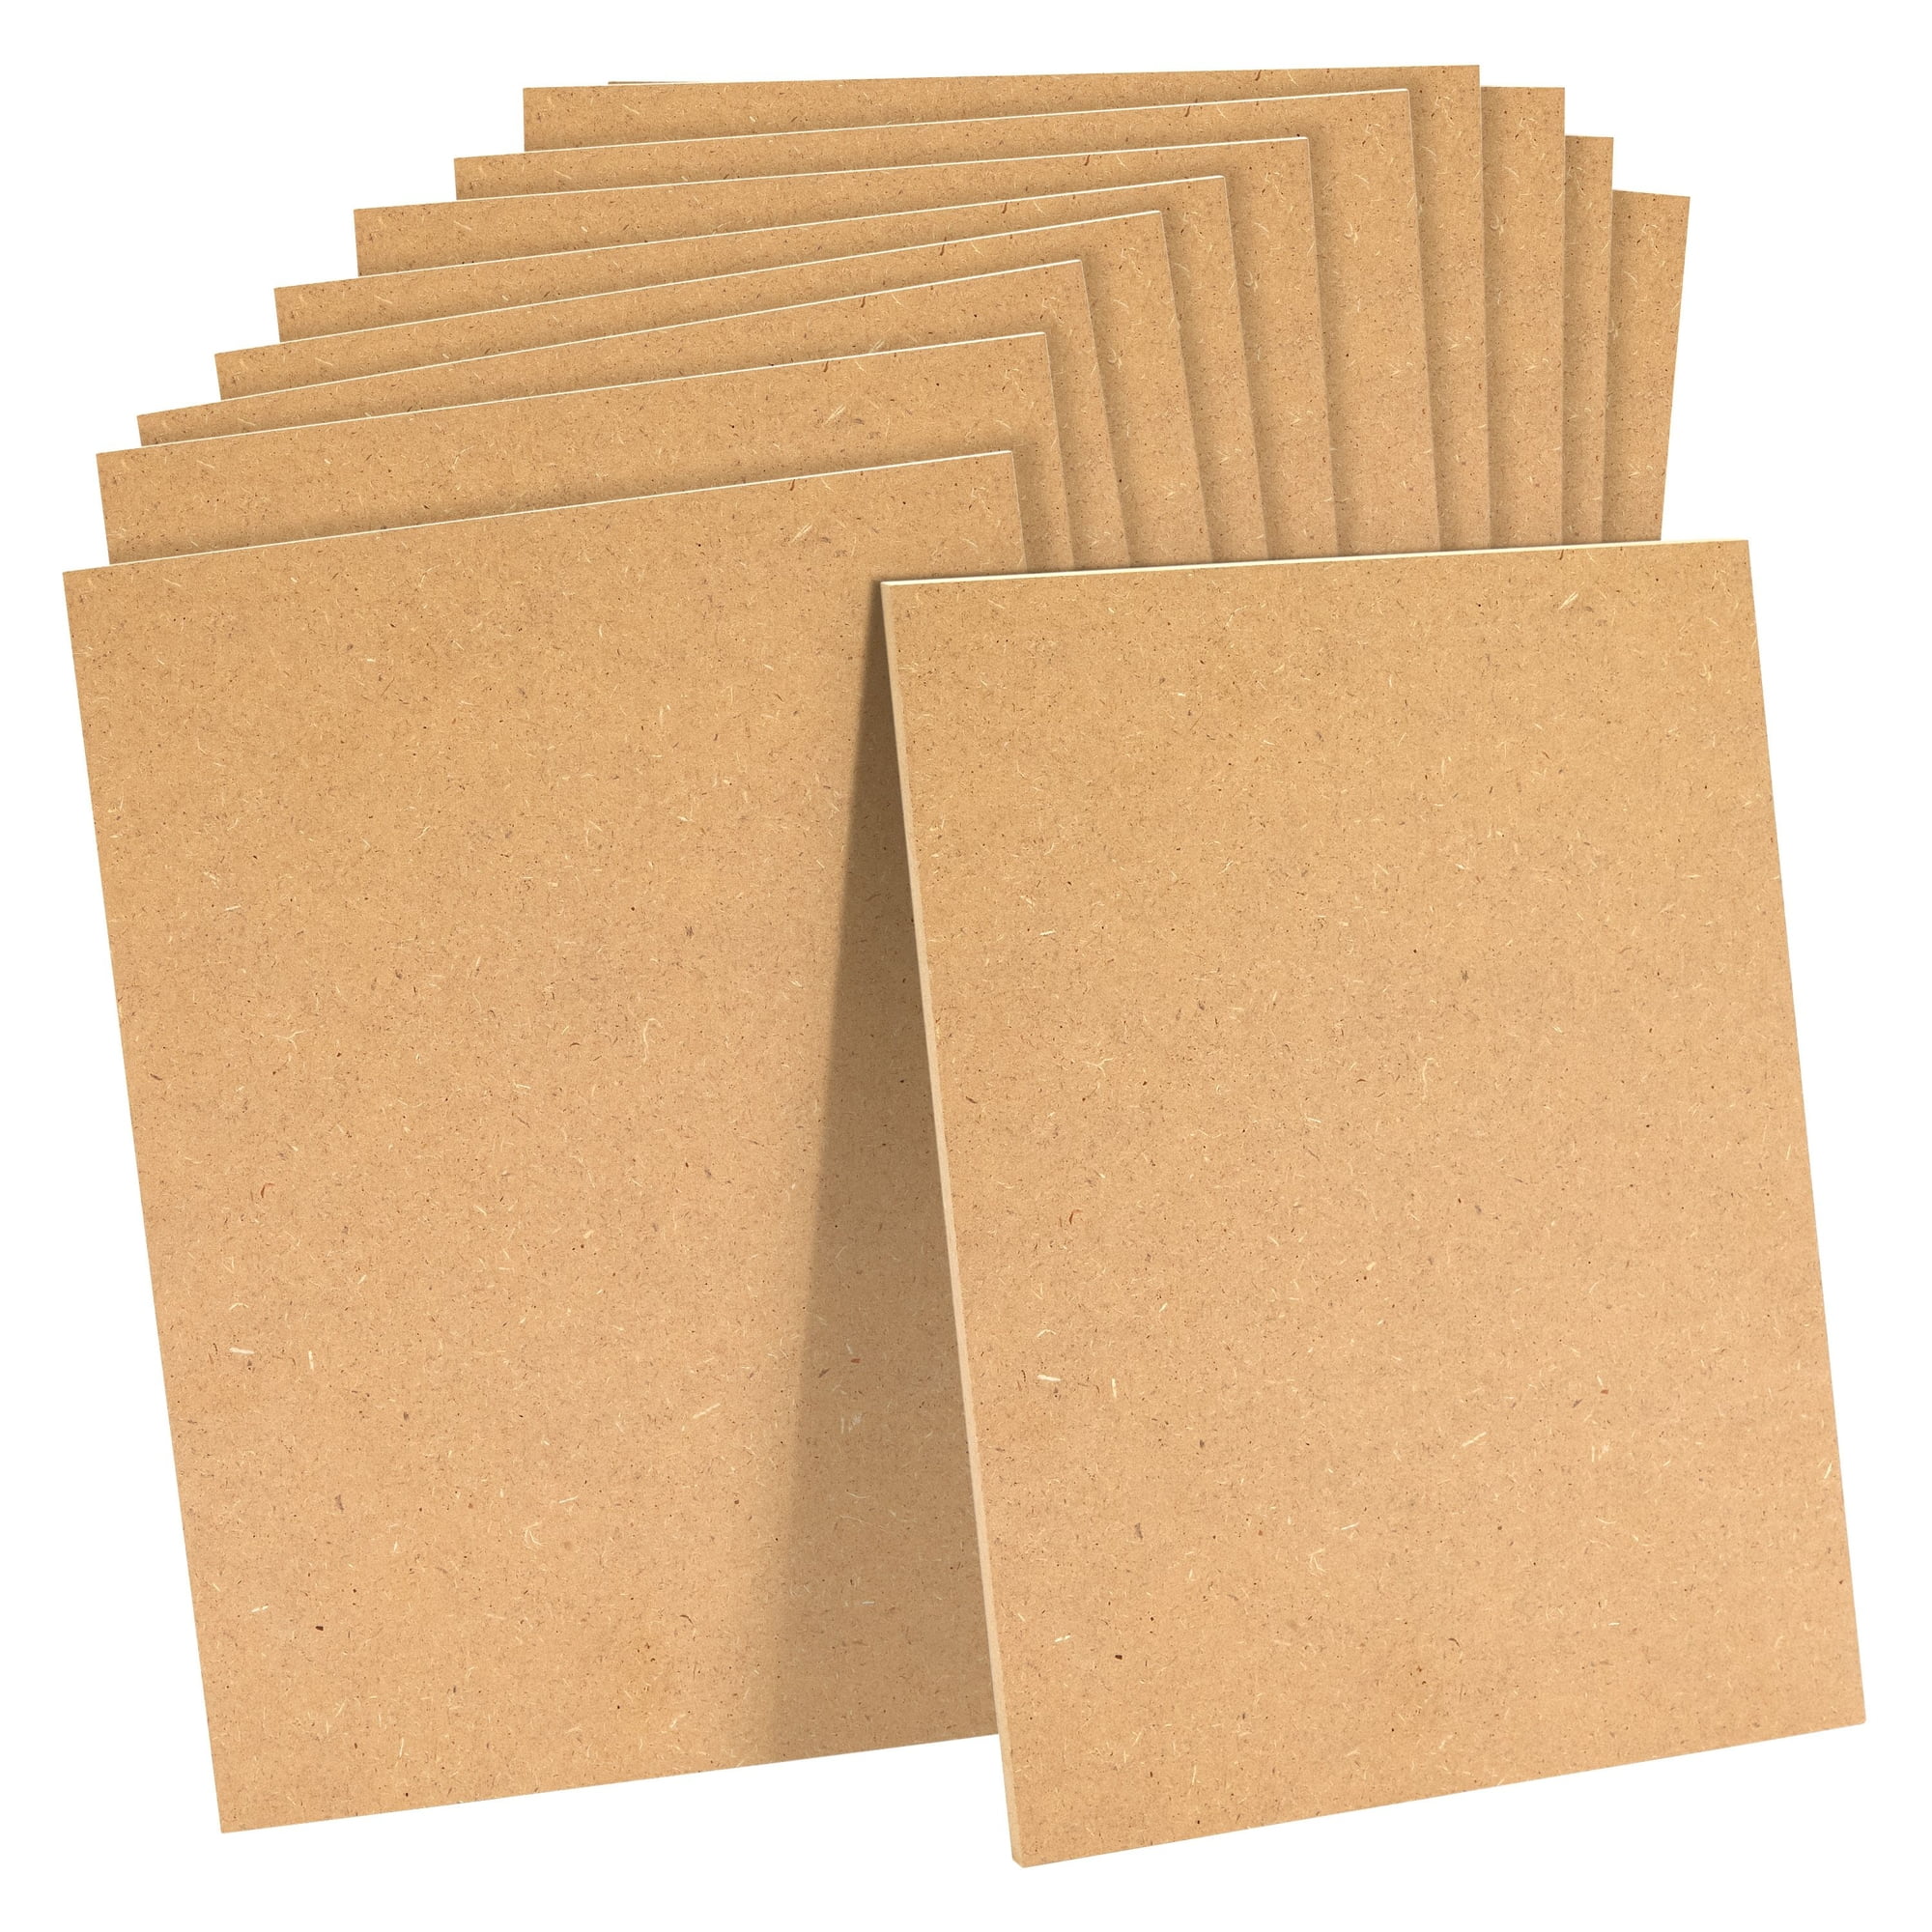 25 Sheets of Chipboard, 30pt (Point) Medium Weight Cardboard .030 Caliper  Thickness, Craft and Packing, Brown Kraft Paper Board (8.5 x 11) 